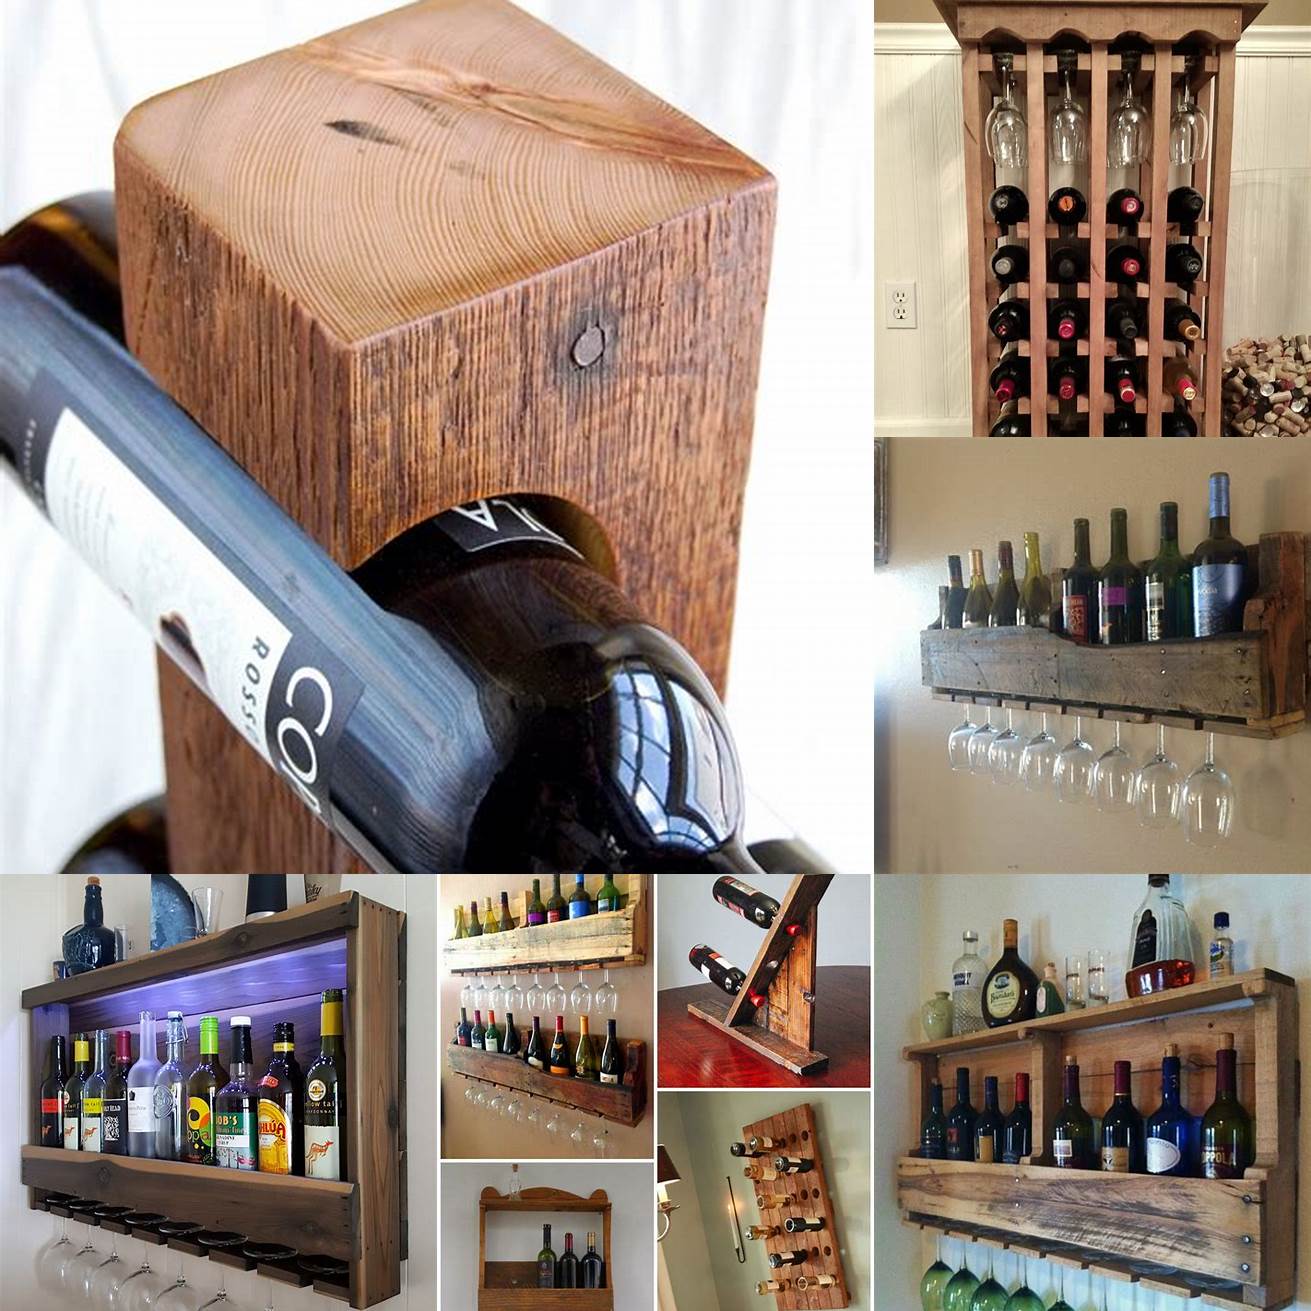 DIY wine rack made from reclaimed wood